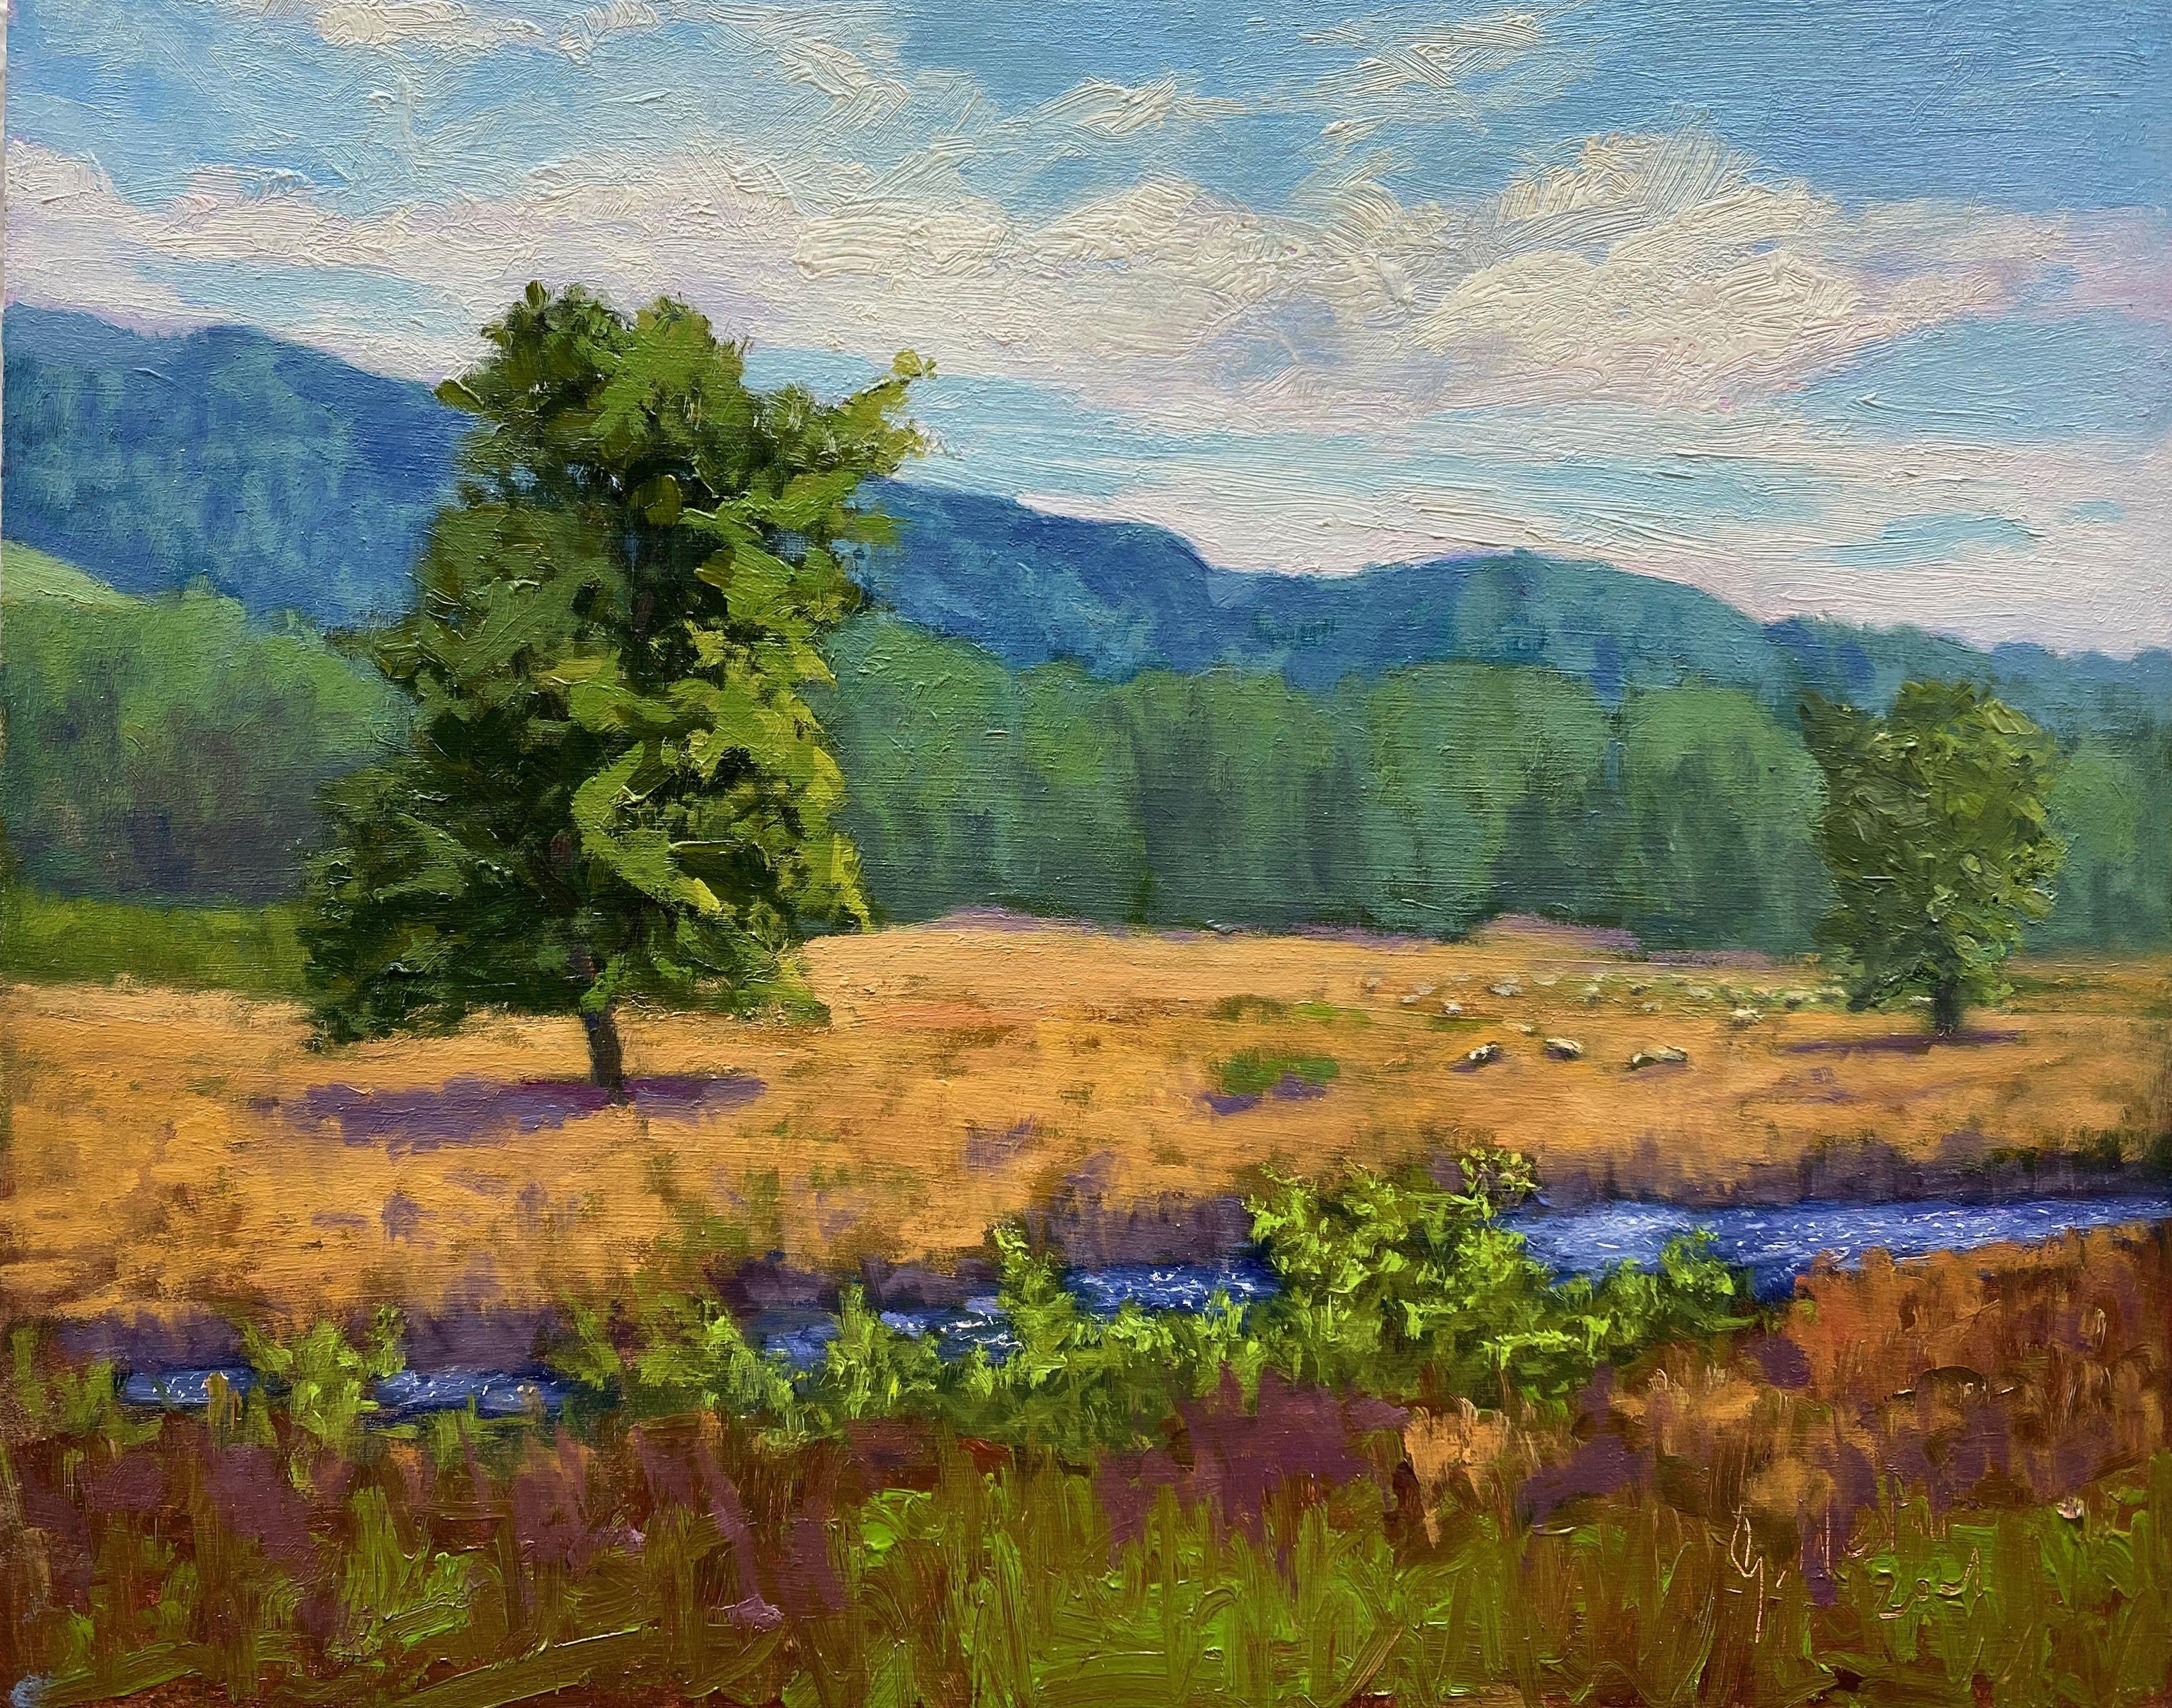 Painted Plein air in the moor, I was lucky, I met the hard-working moor sheep, and  I was able to watch them and admire their endurance and diligence. :: Painting :: Impressionist :: This piece comes with an official certificate of authenticity